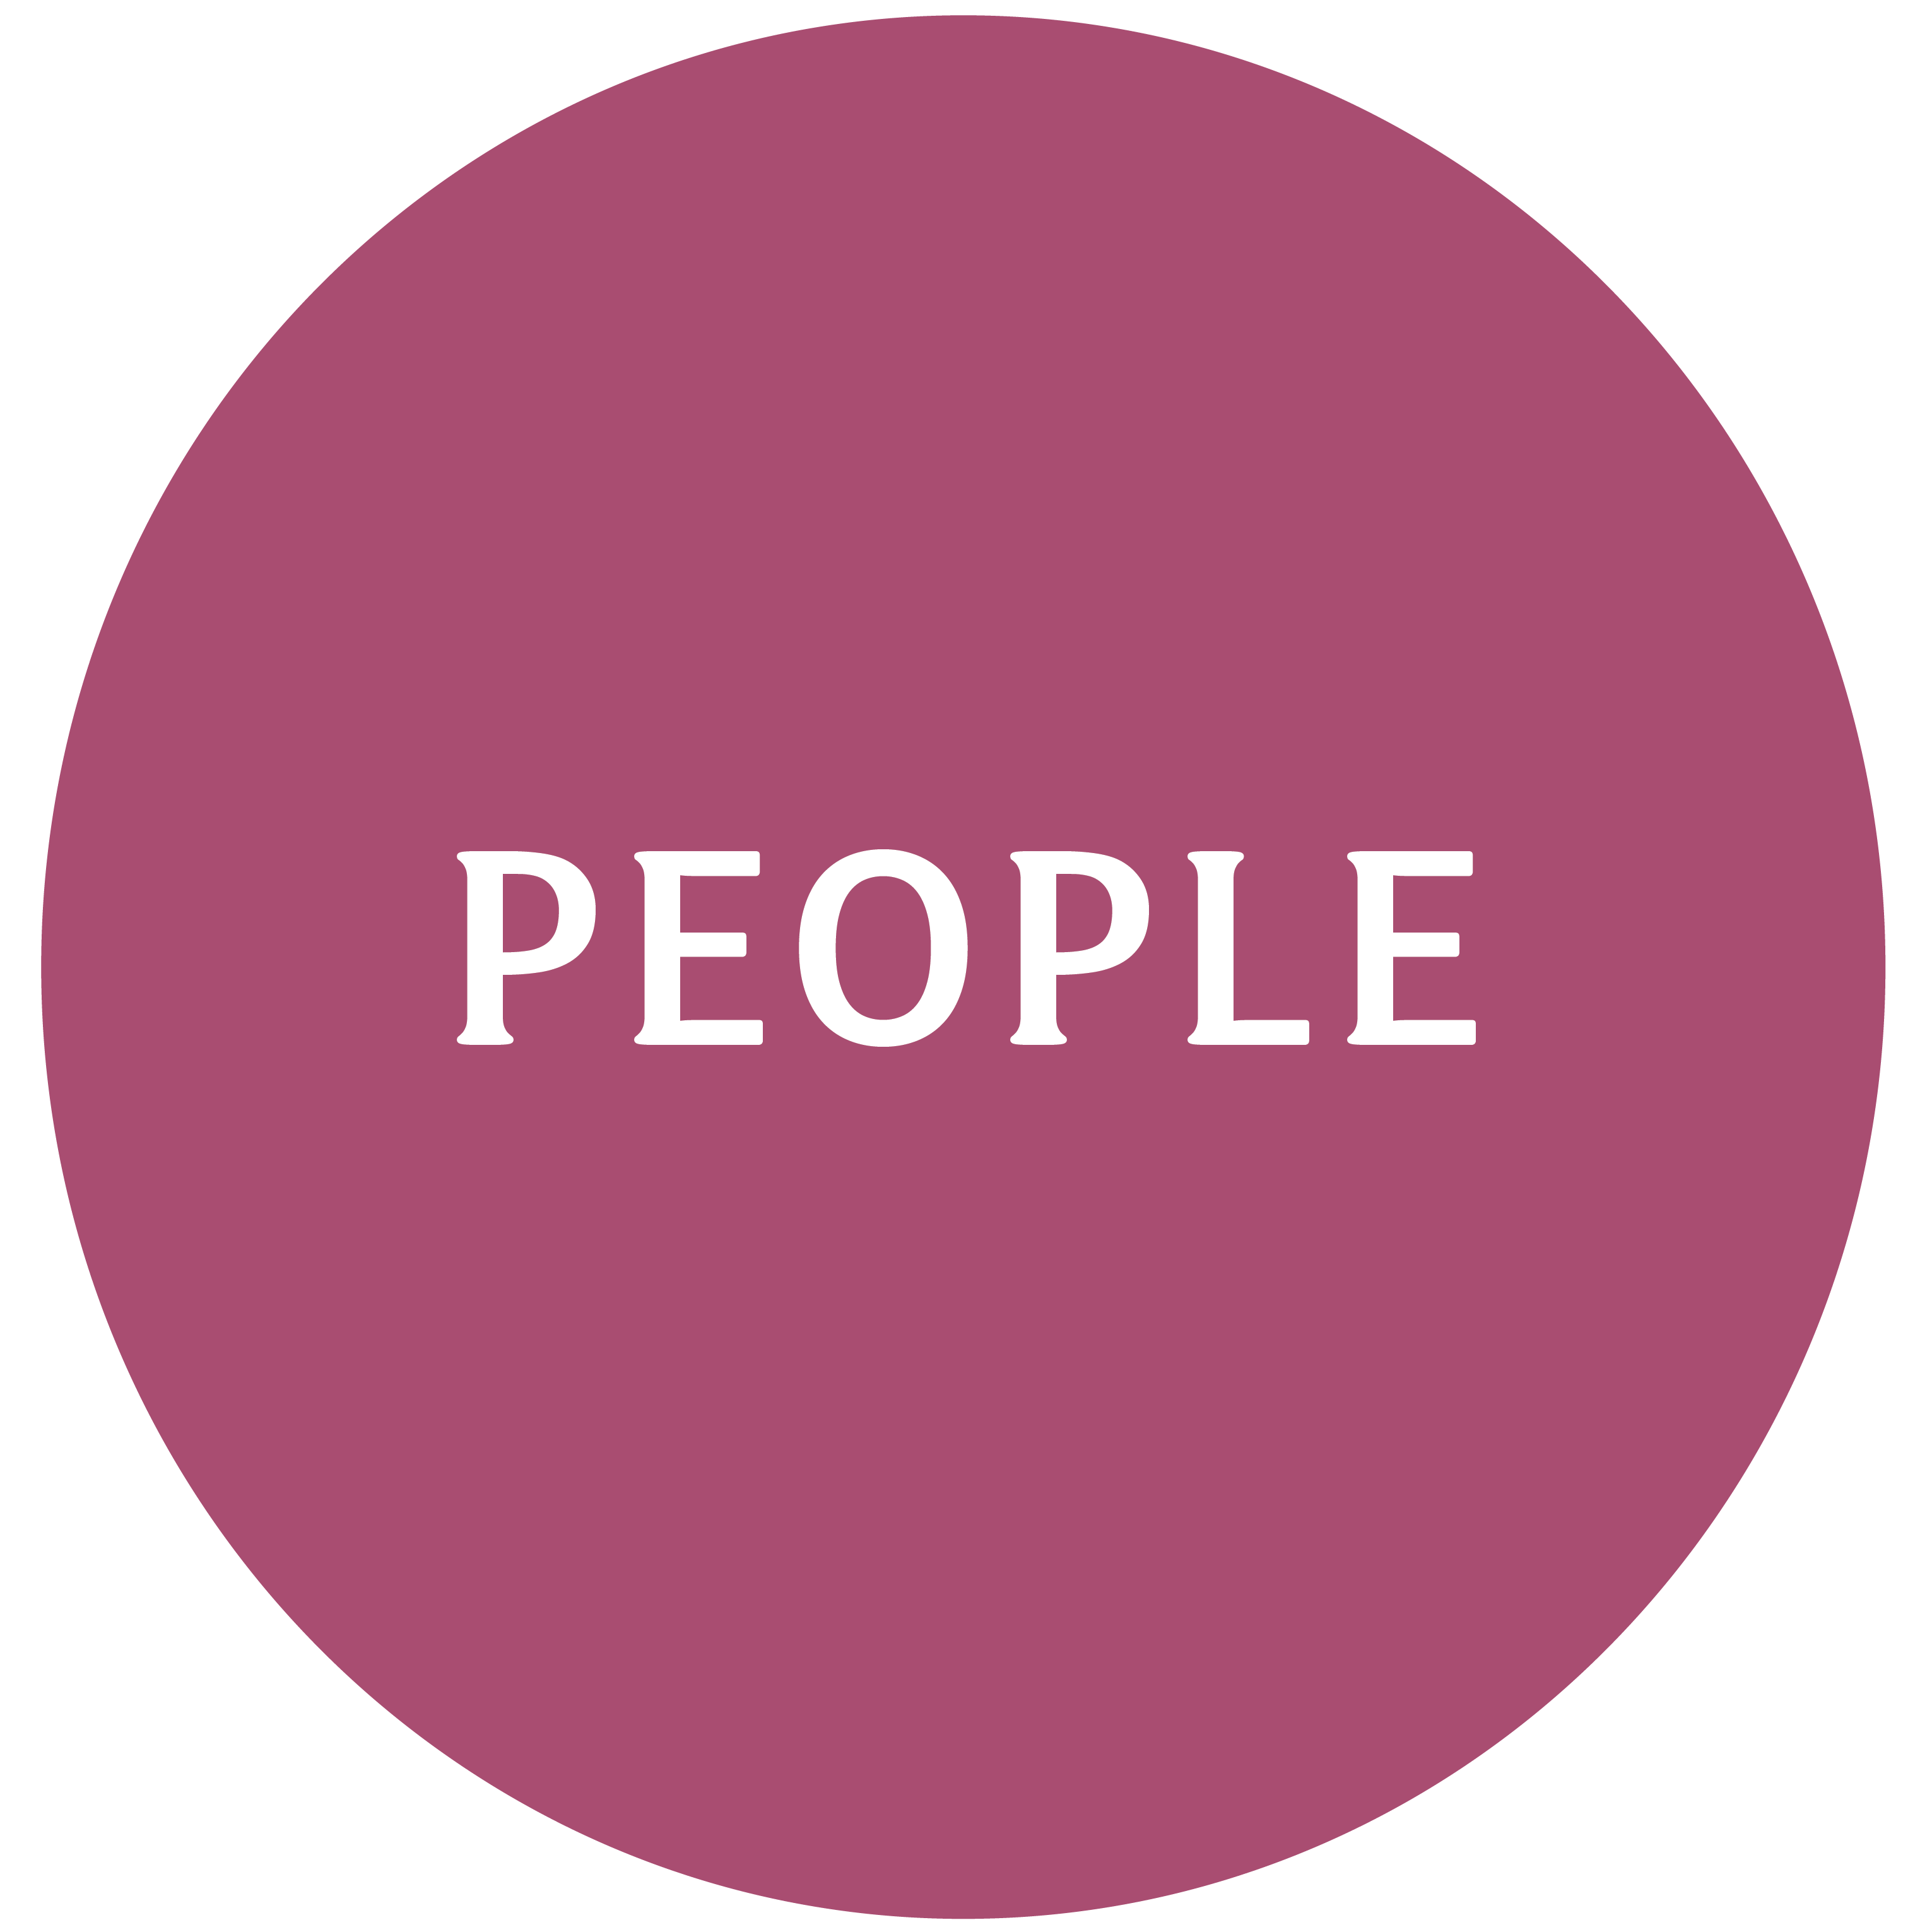 Our shared vision: people